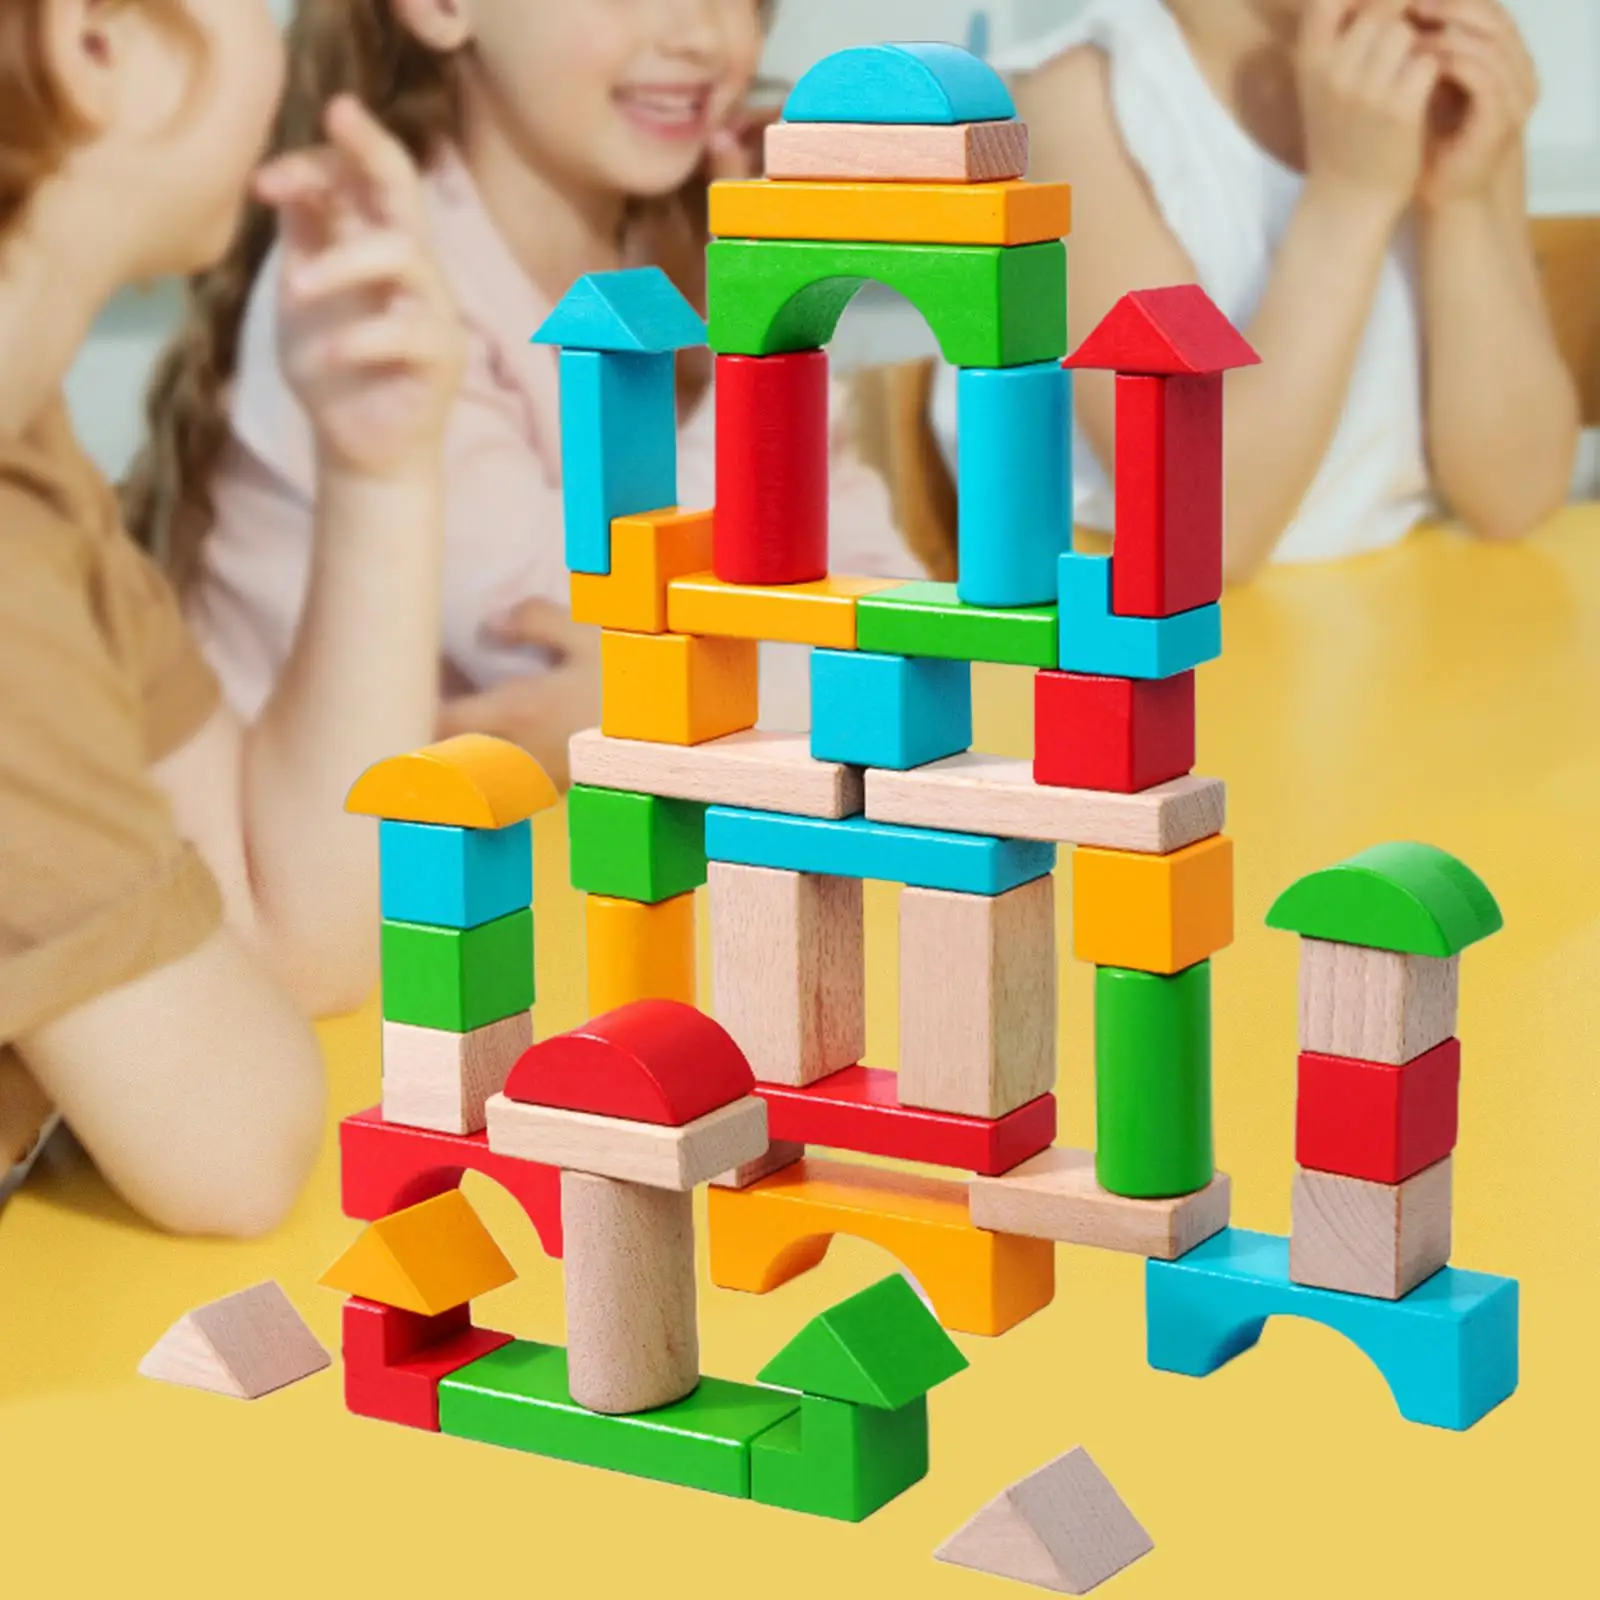 Assembly Montessori Toys 3D Shapes Geometric Solids Geometric Shapes for Elementary School Classroom Manipulatives